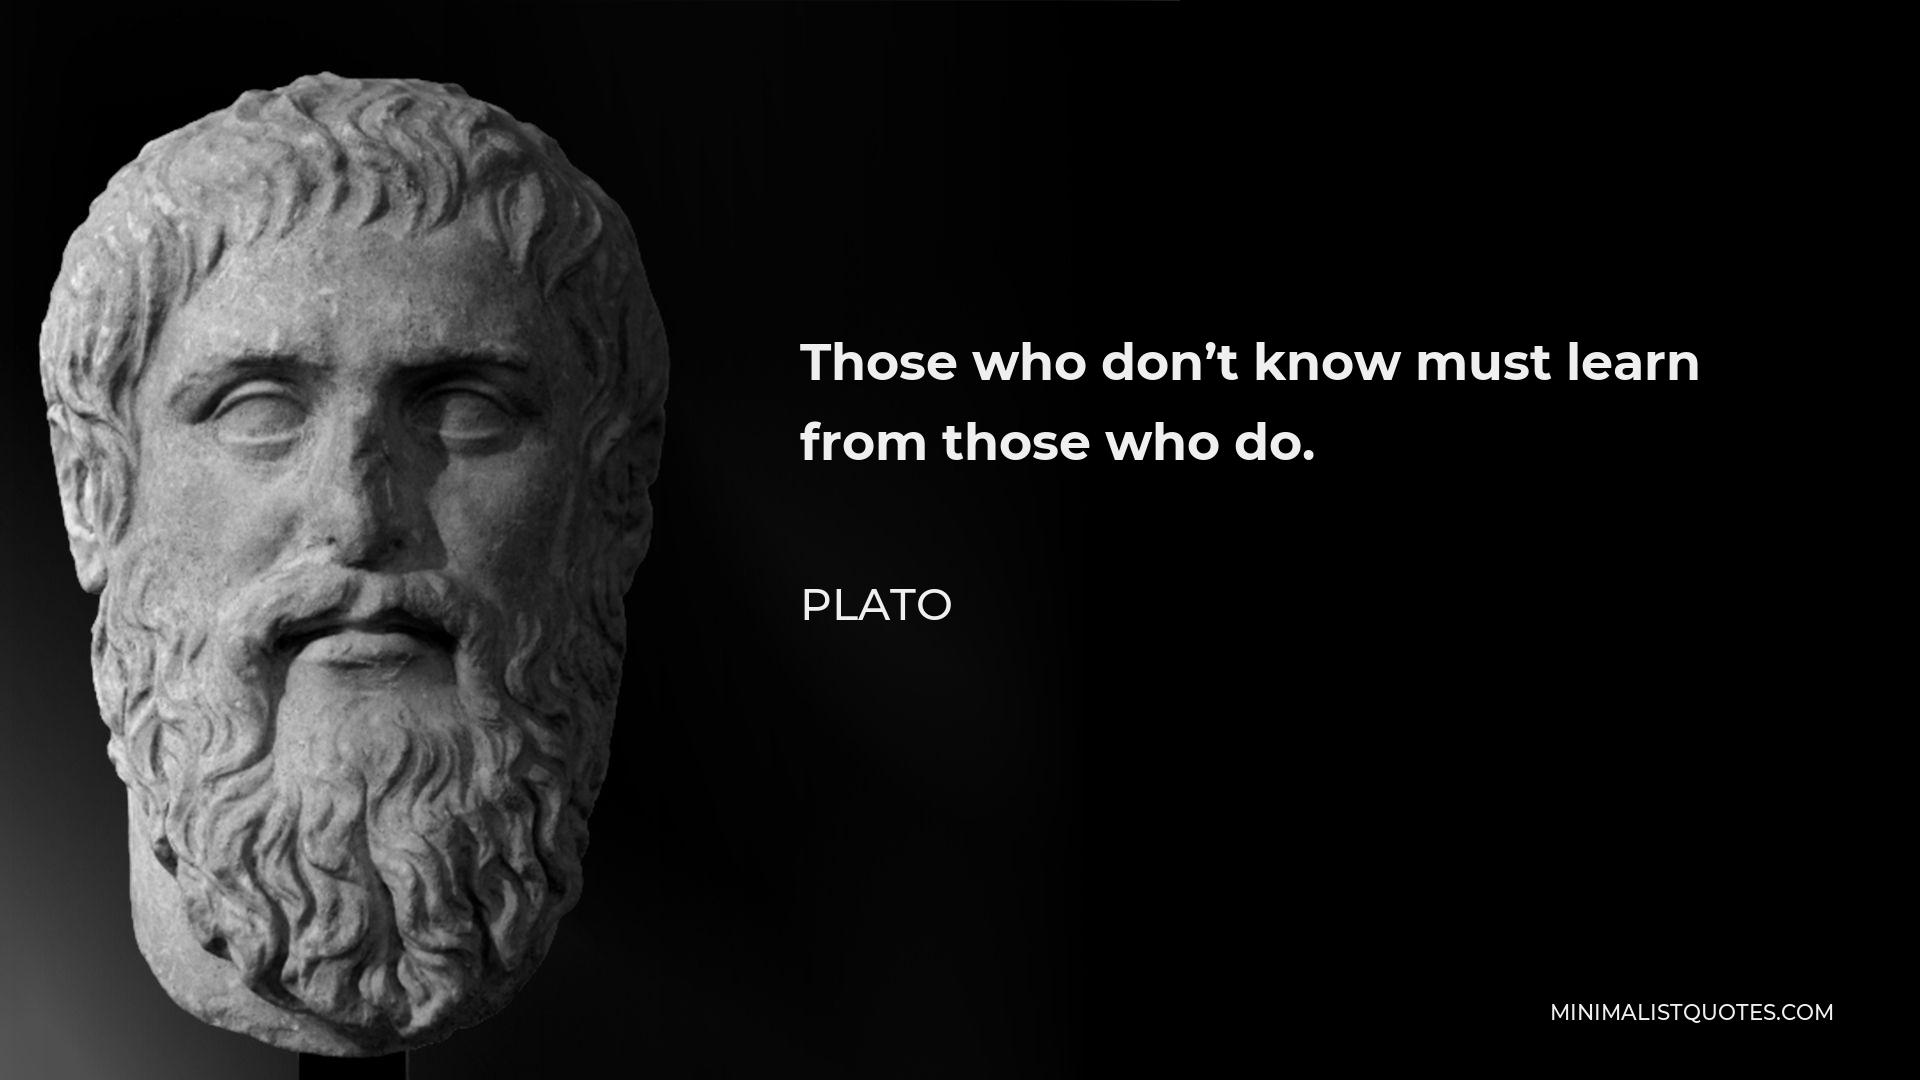 Plato Quote: Those who don't know must learn from those who do.